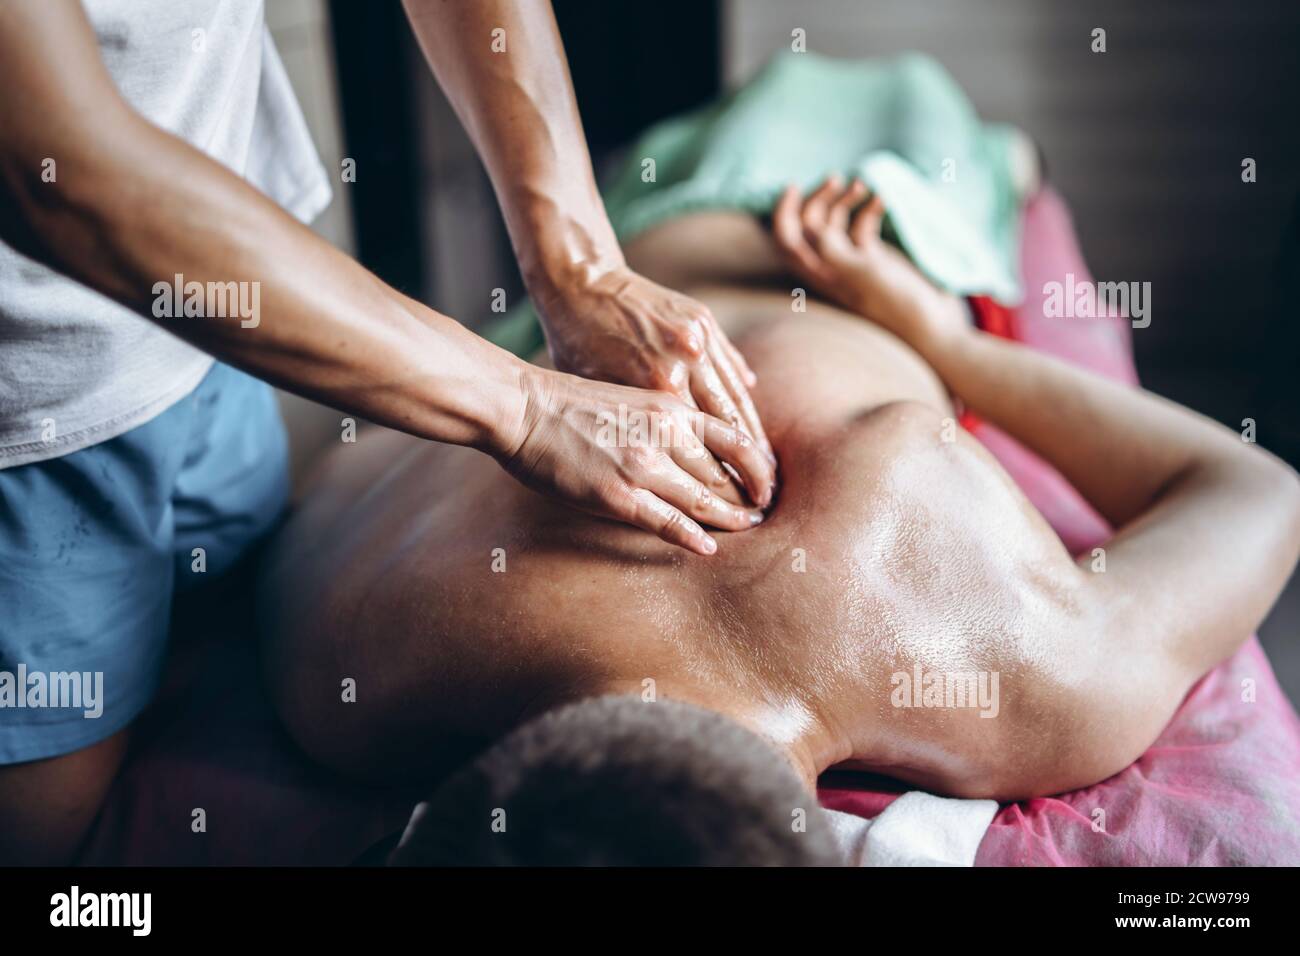 A woman physiotherapist doing back massage for a man in the medical office. Closeup of hands doing massage. Stock Photo